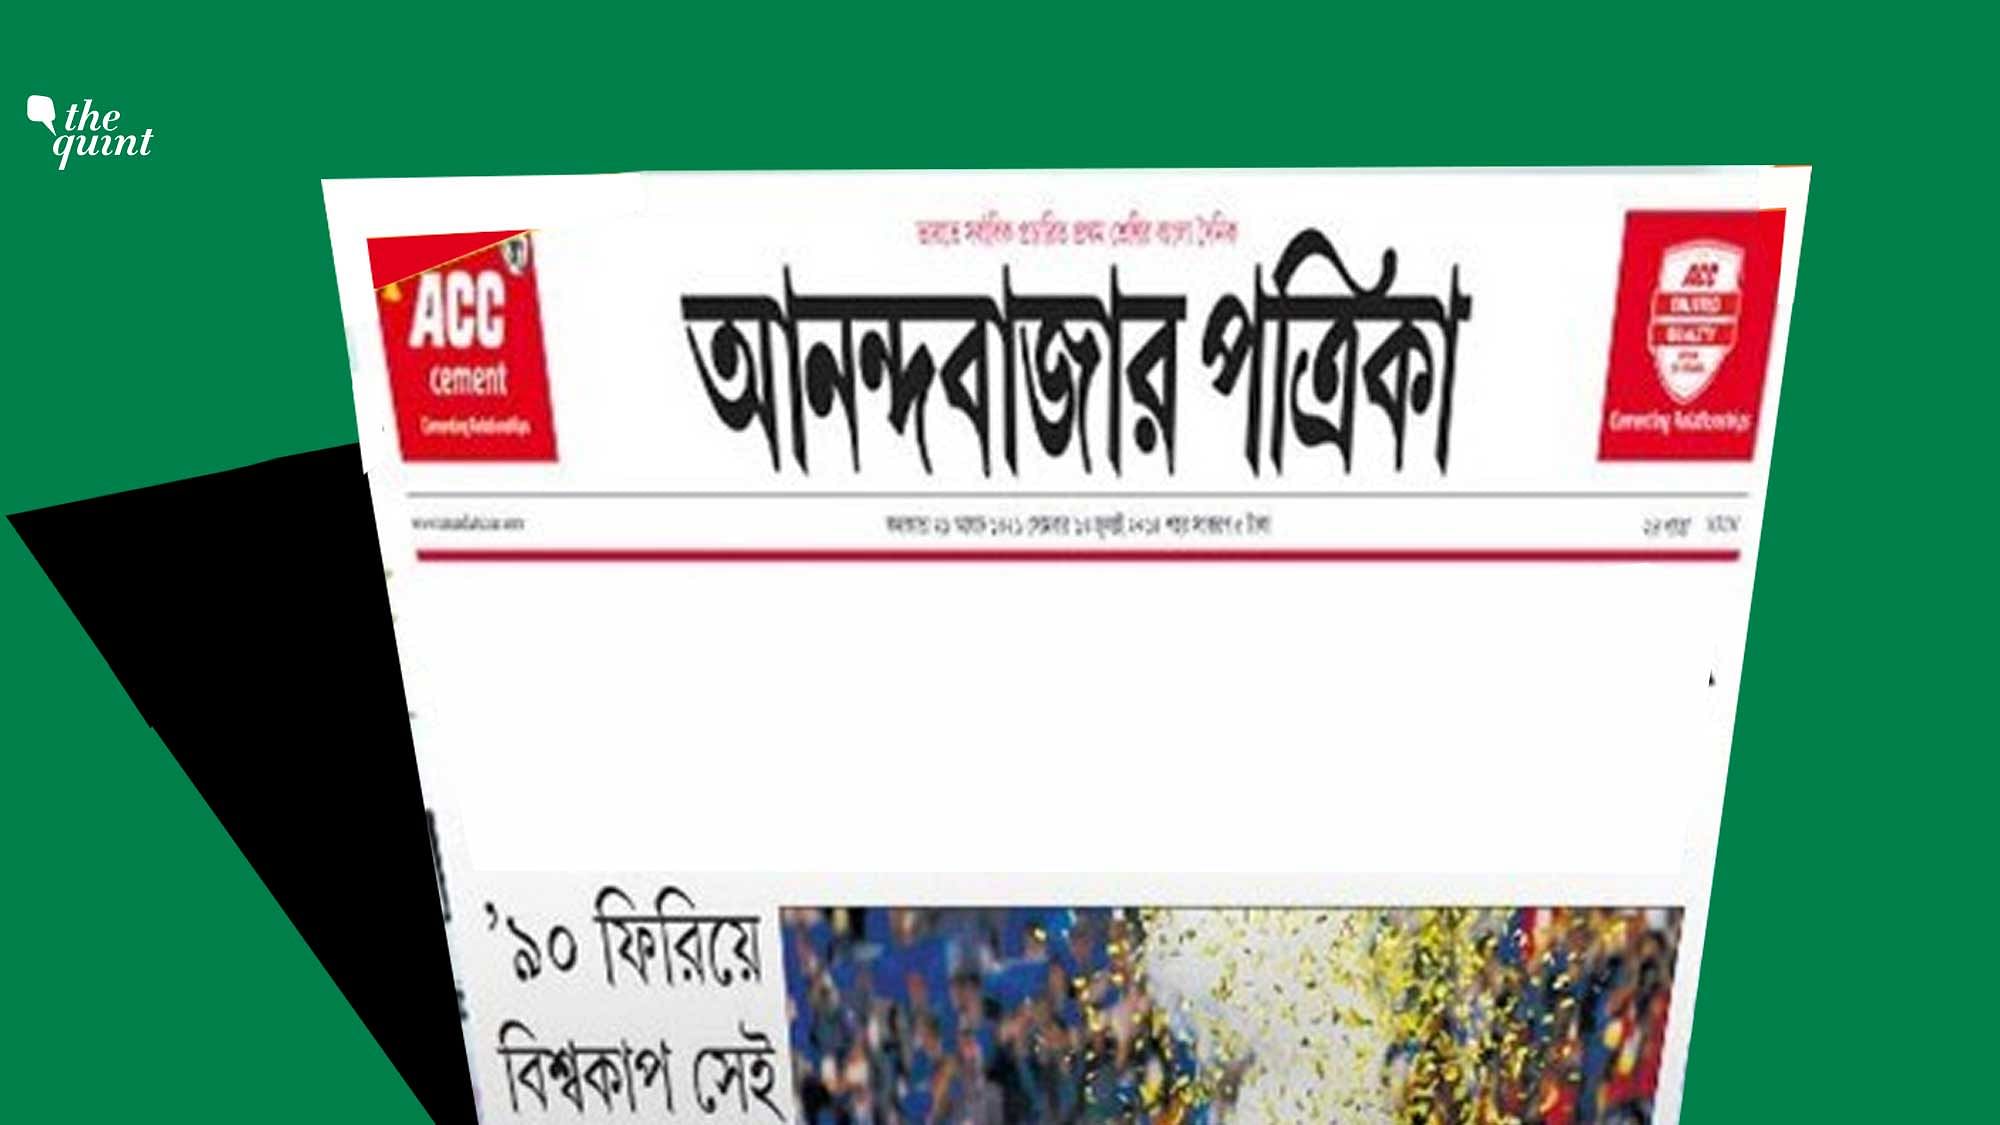 Questions on press freedom in West Bengal have risen after editor of the Anandabazar Patrika, Anirban Chattopadhyay, stepped down from his position. He has however, denied any political angle to his exit.